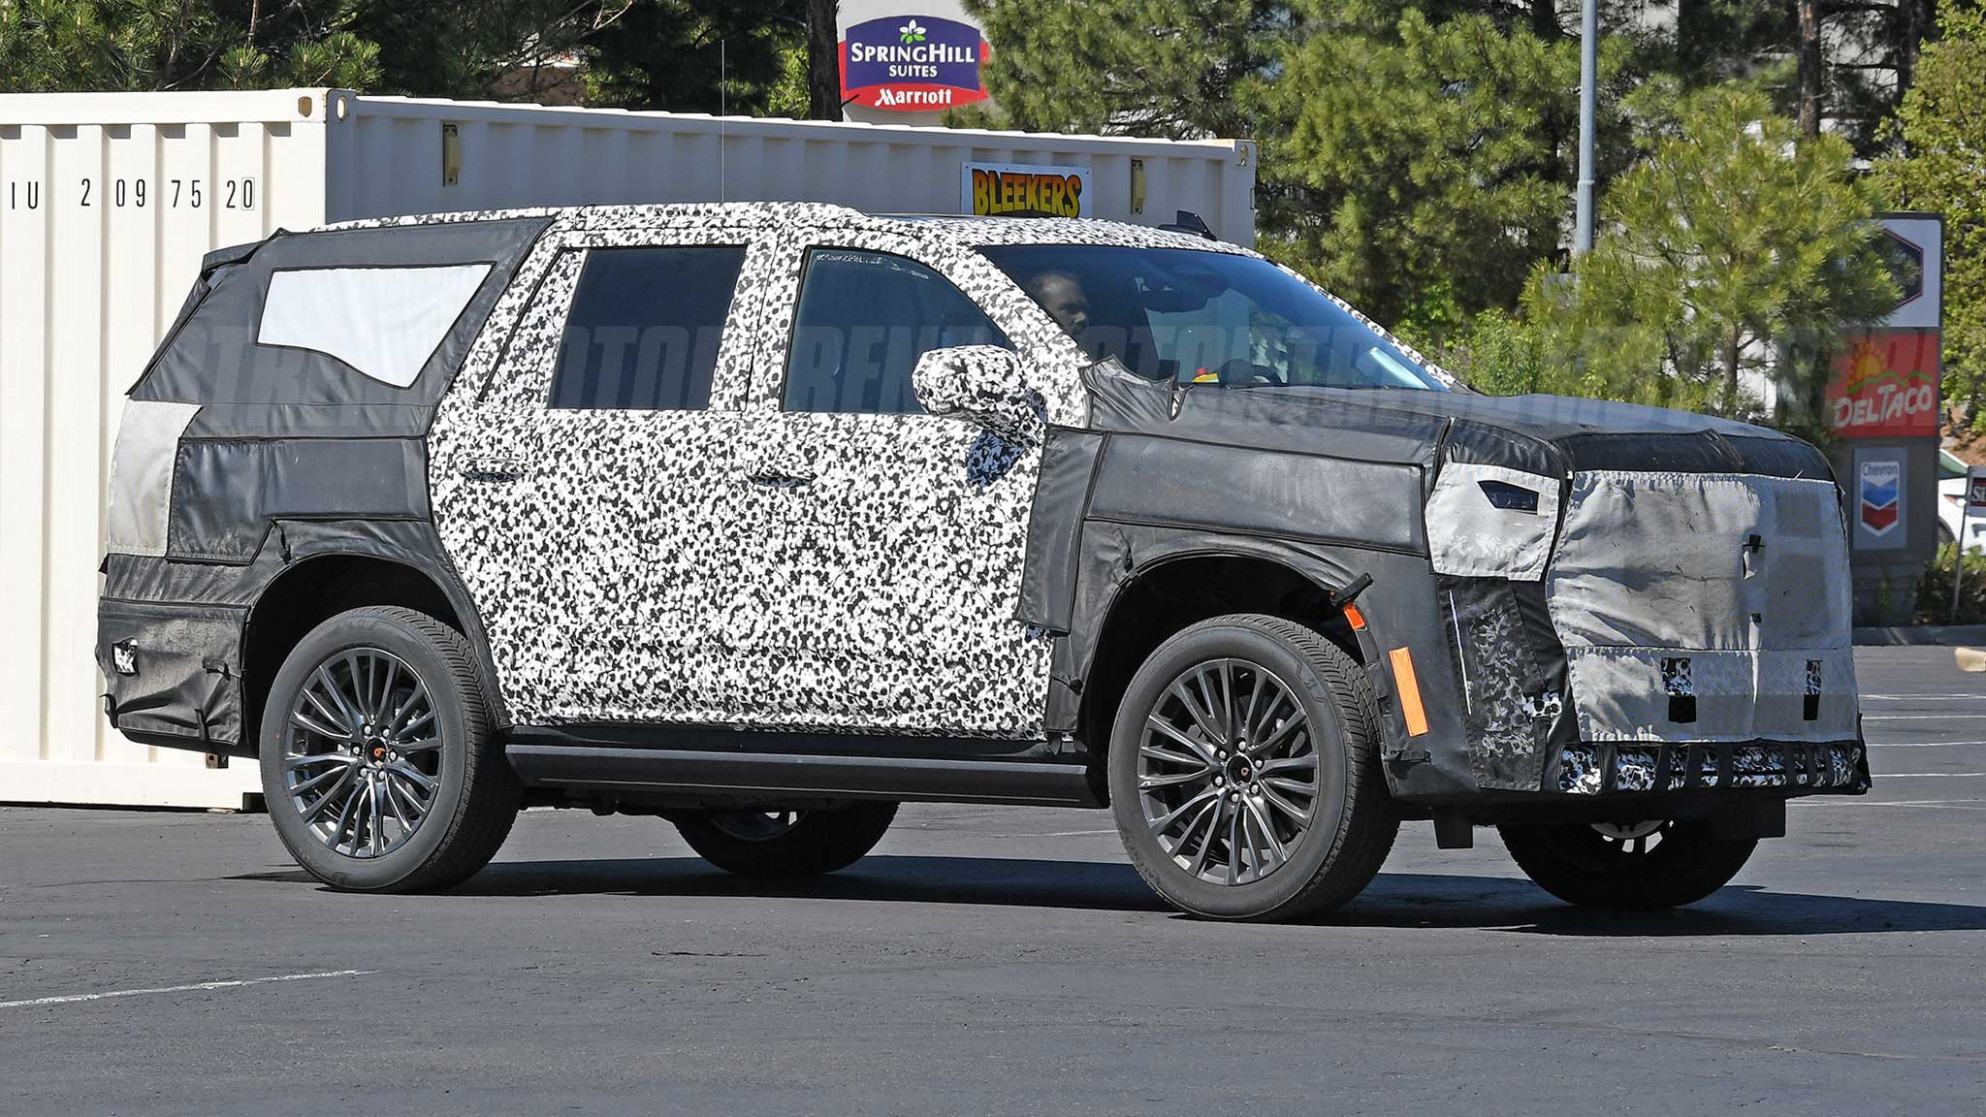 Redesign and Concept Pictures Of The 2023 Cadillac Escalade